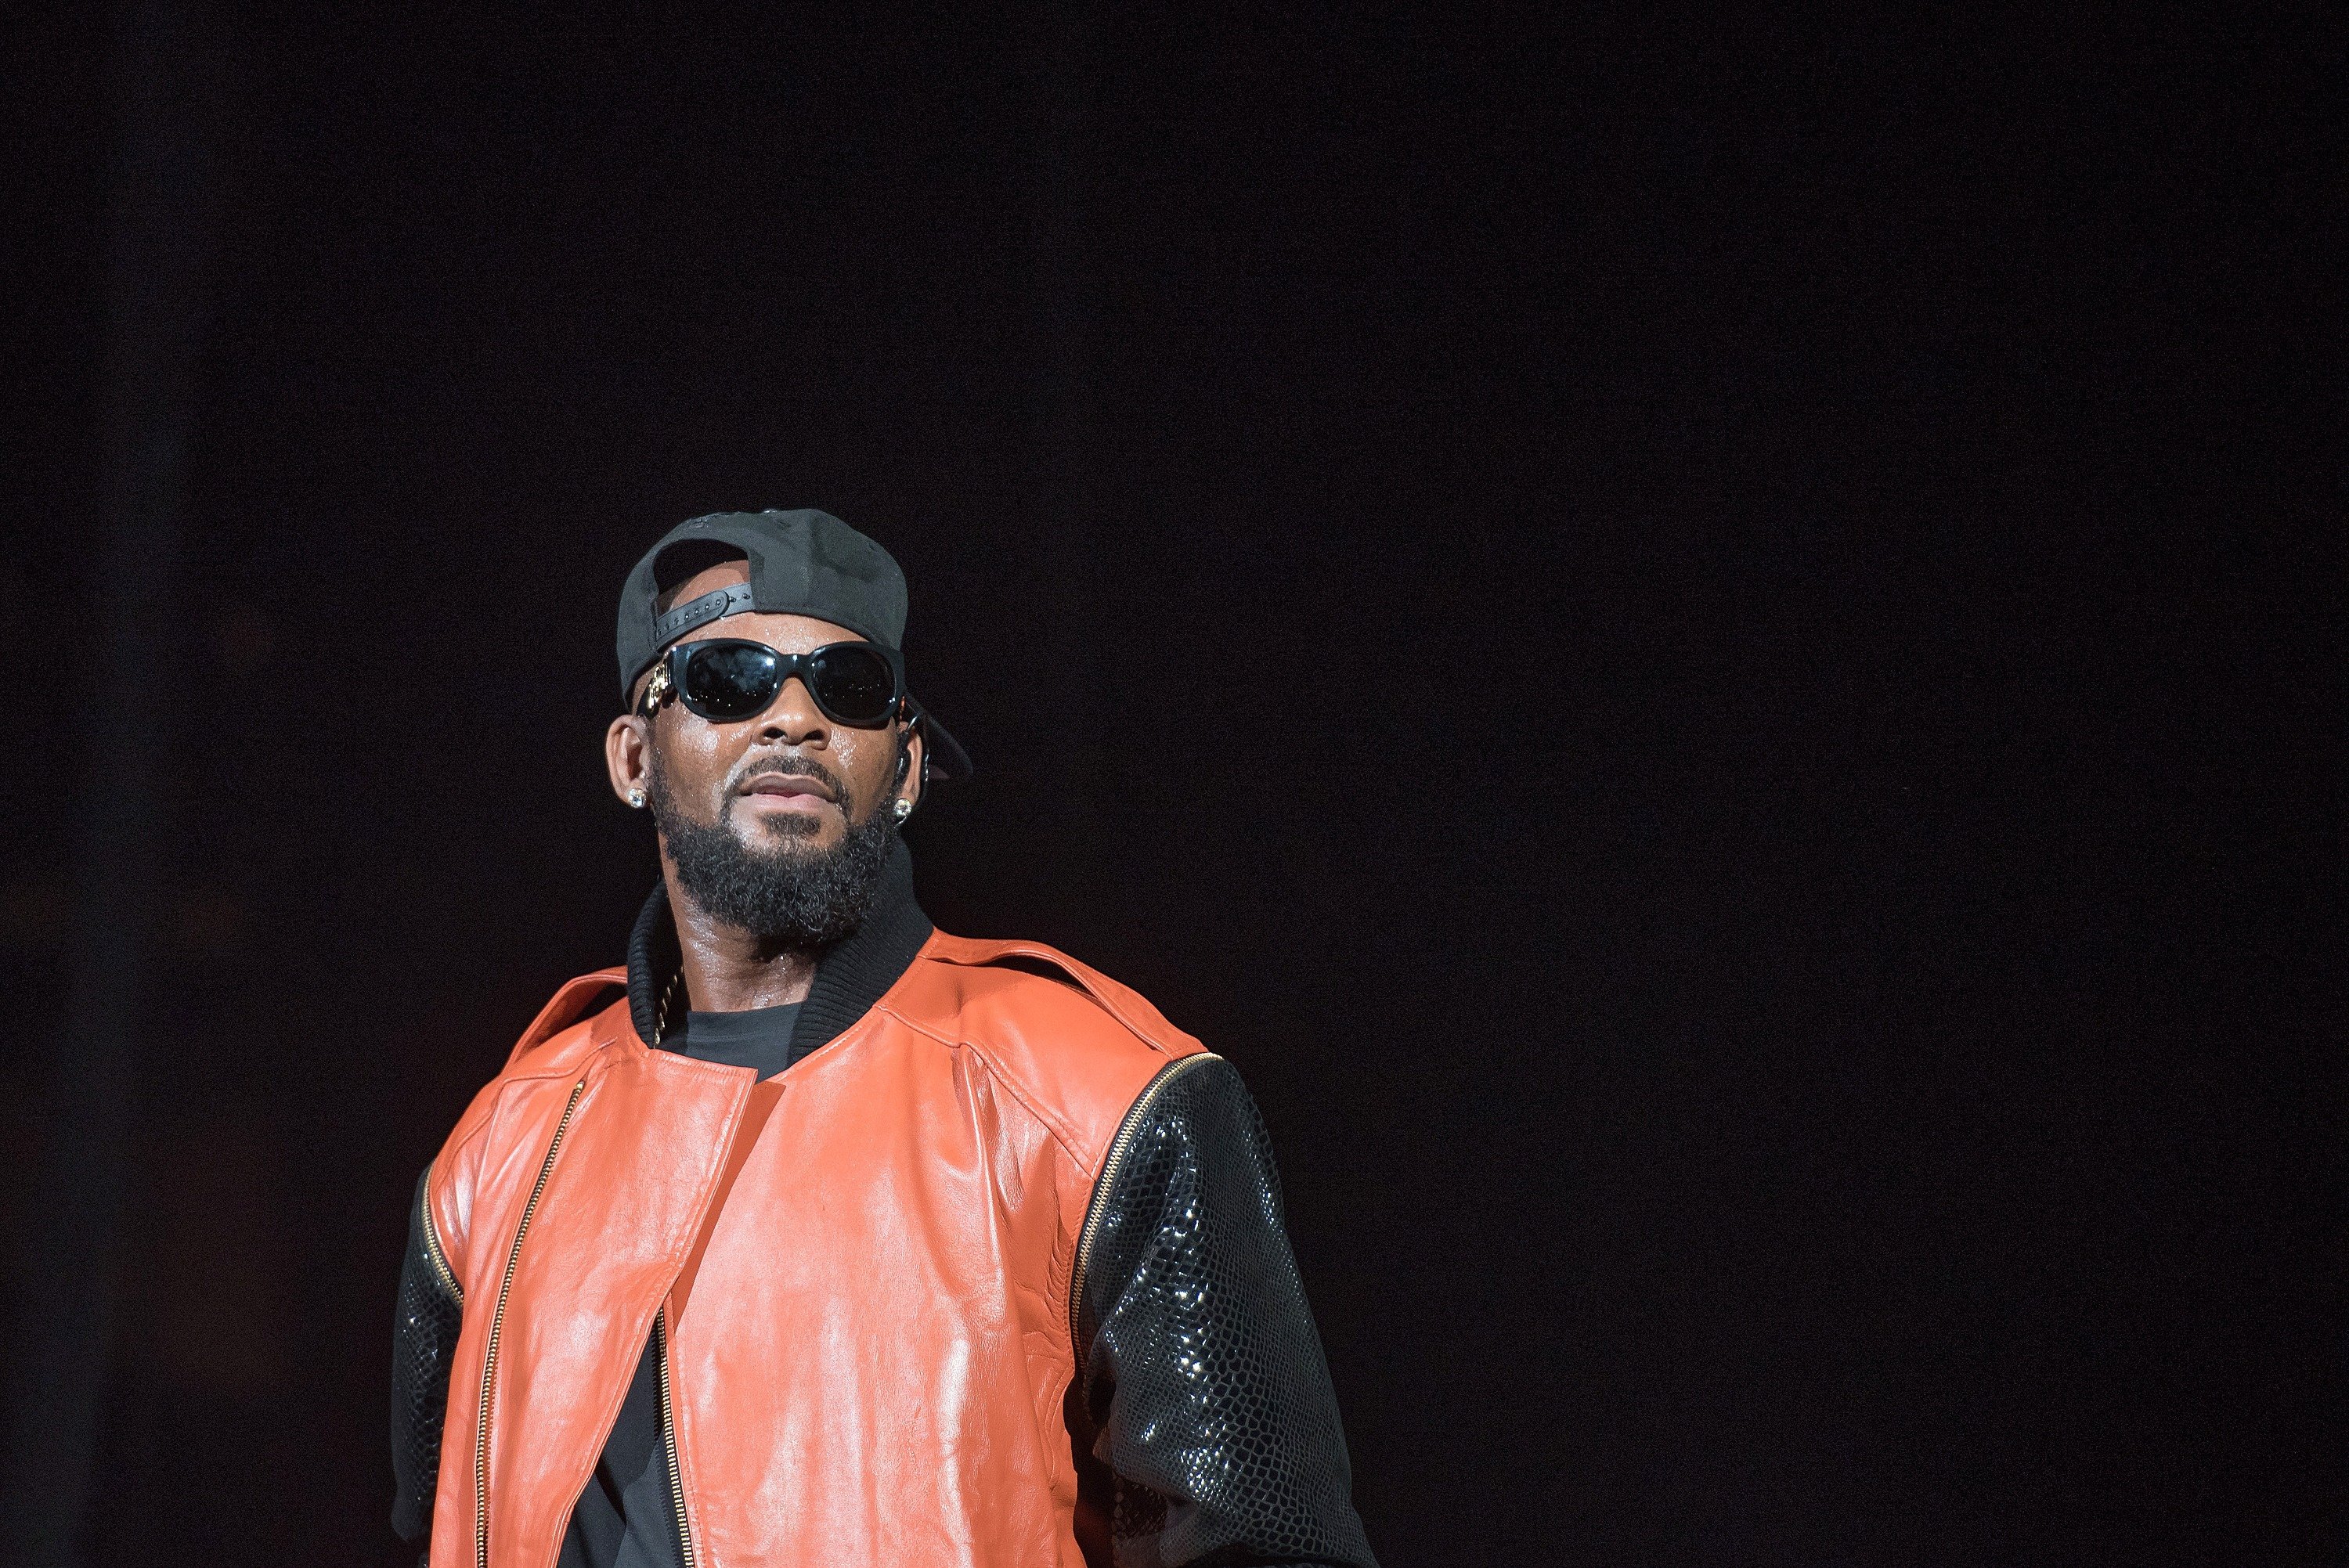 R. Kelly performs in New York City. September 25, 2015. | Source: GettyImages/Global Images of Ukraine